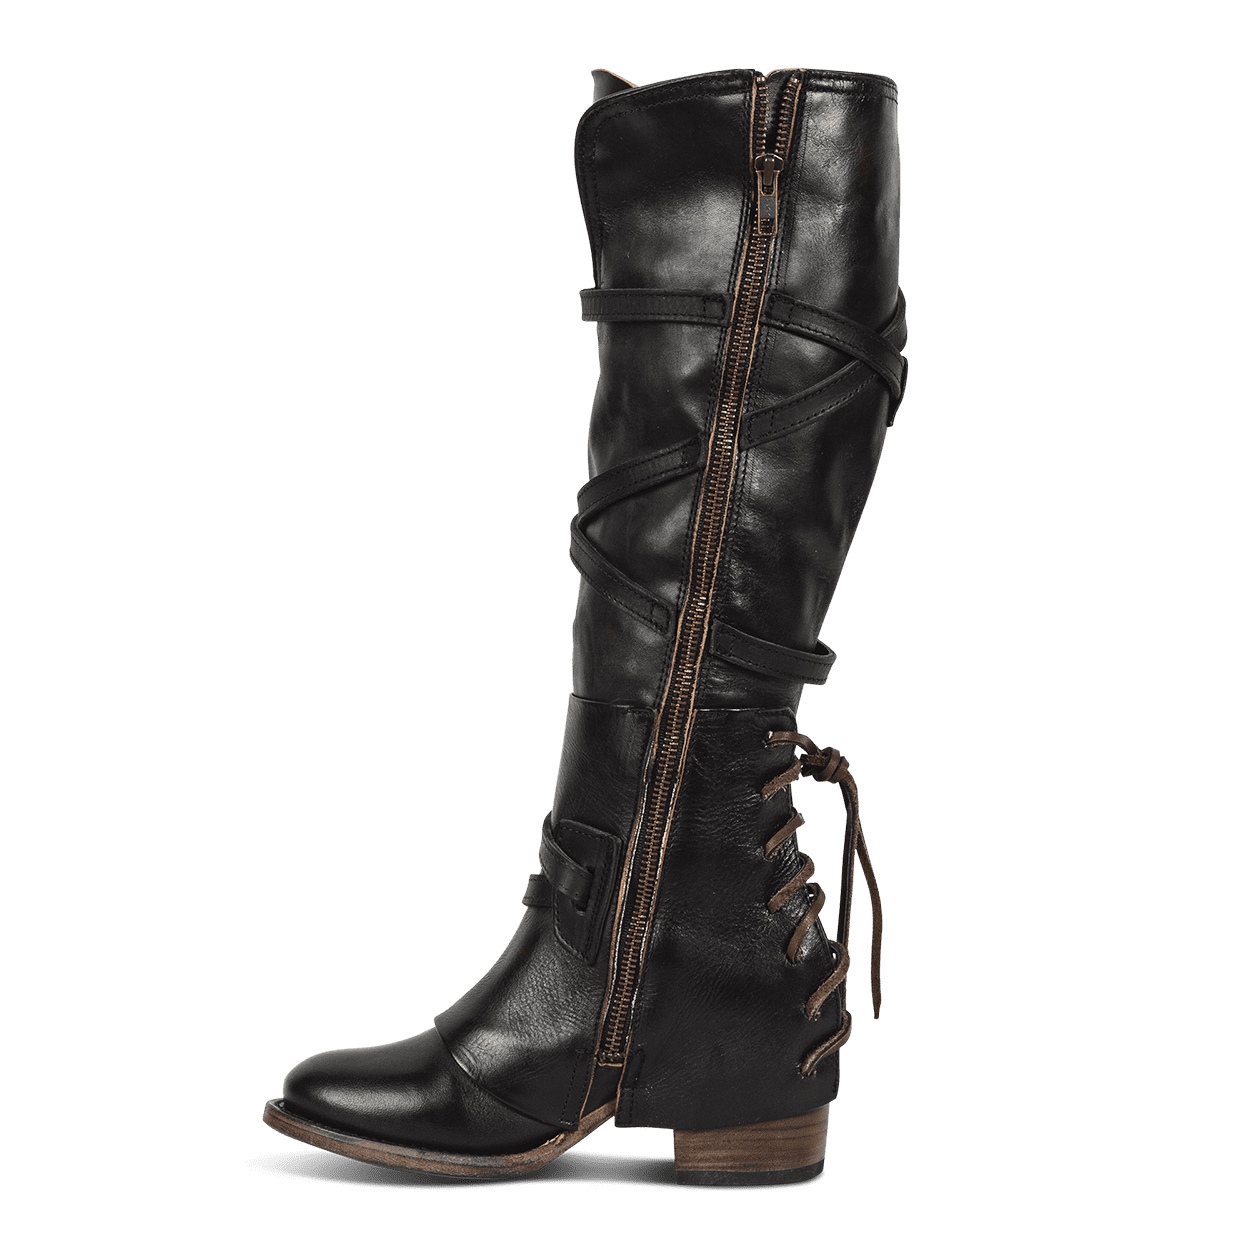 Inside view showing working brass zip closure and leather shaft straps on FREEBIRD women's Cassius black tall leather boot